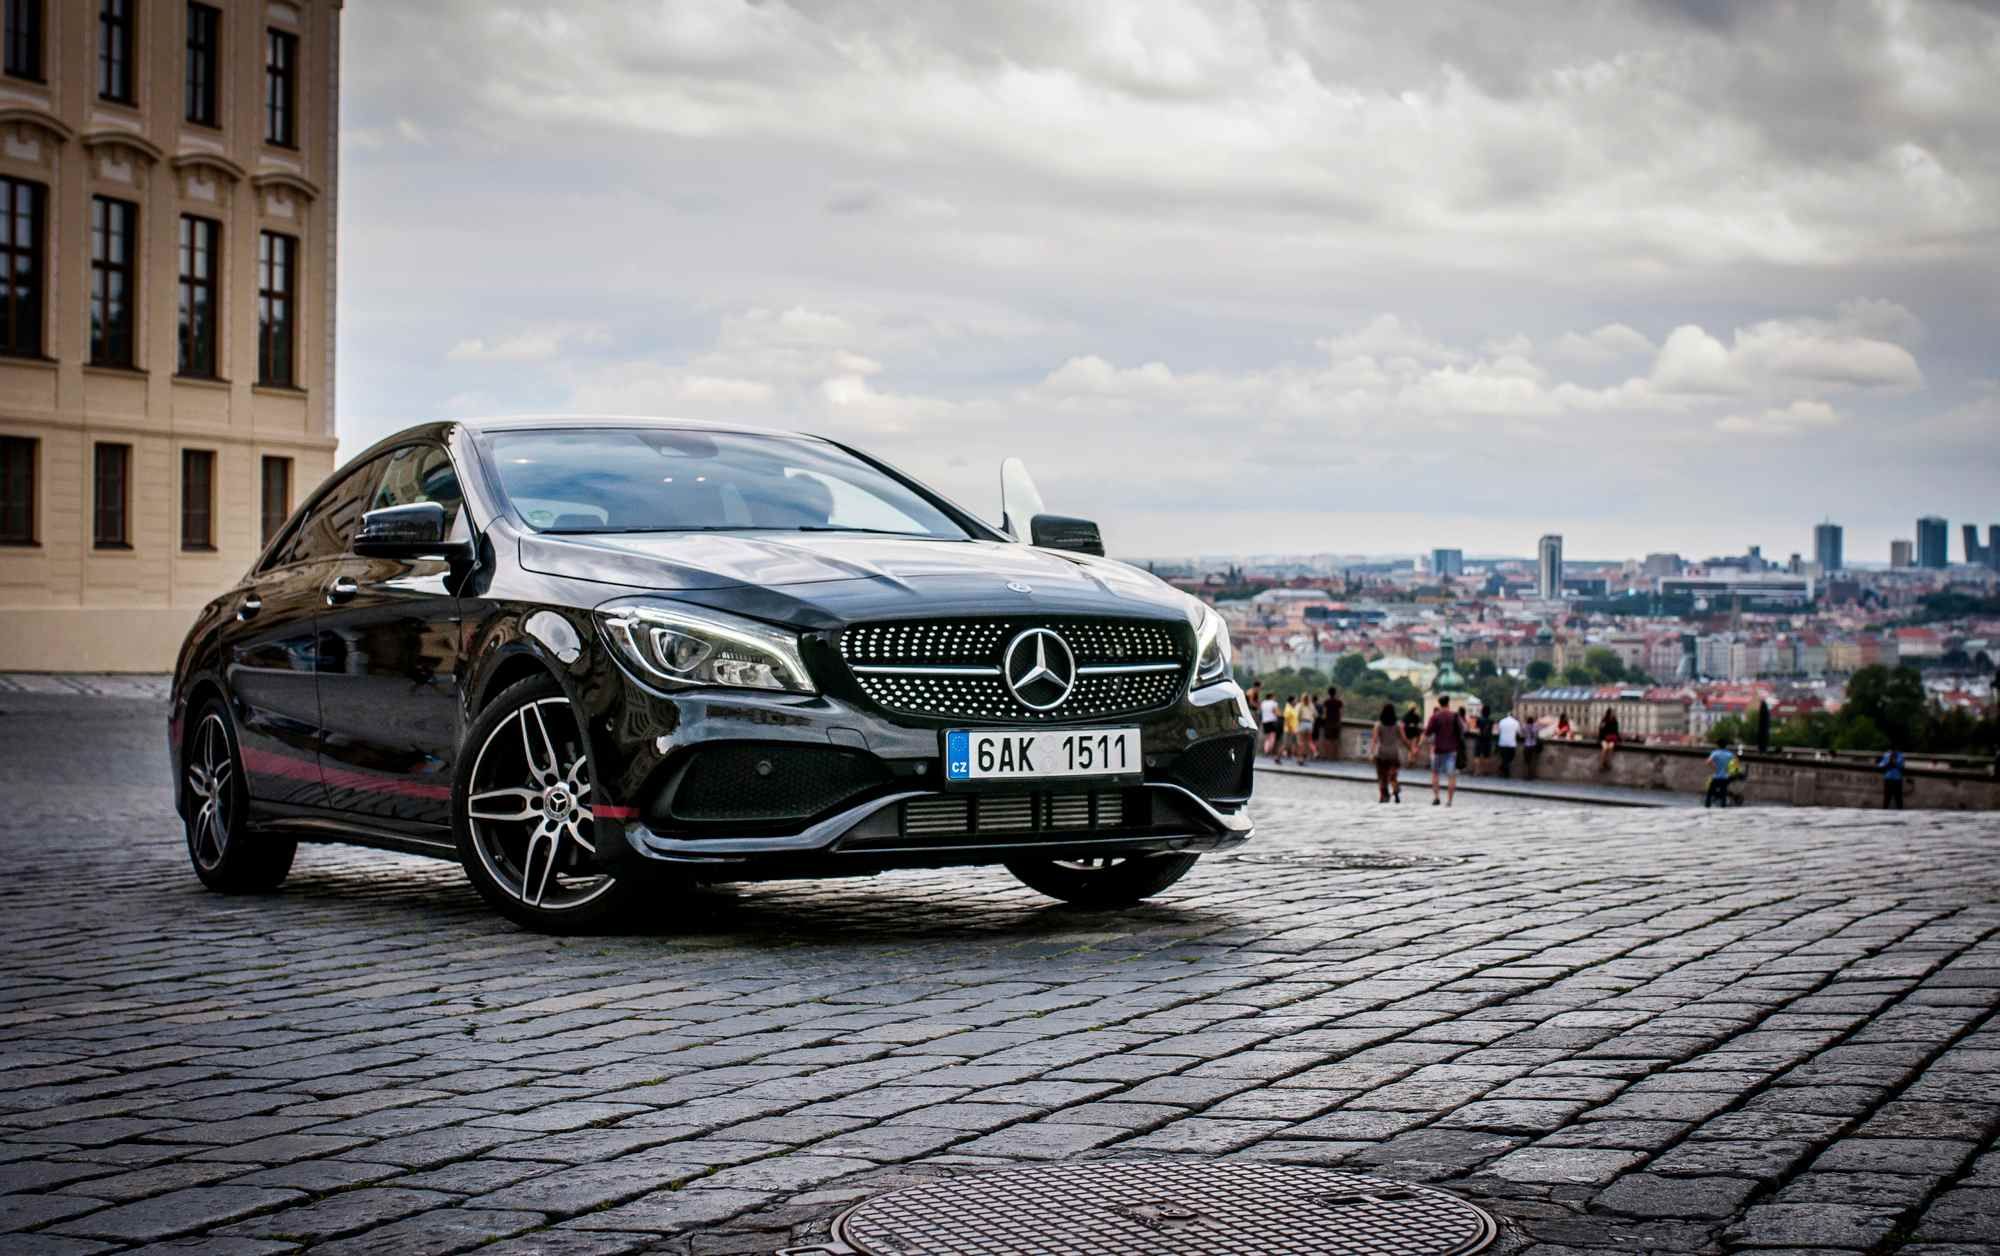 Mercedes Benz is facing up to $1.2 million in damages from an emissions scandal.